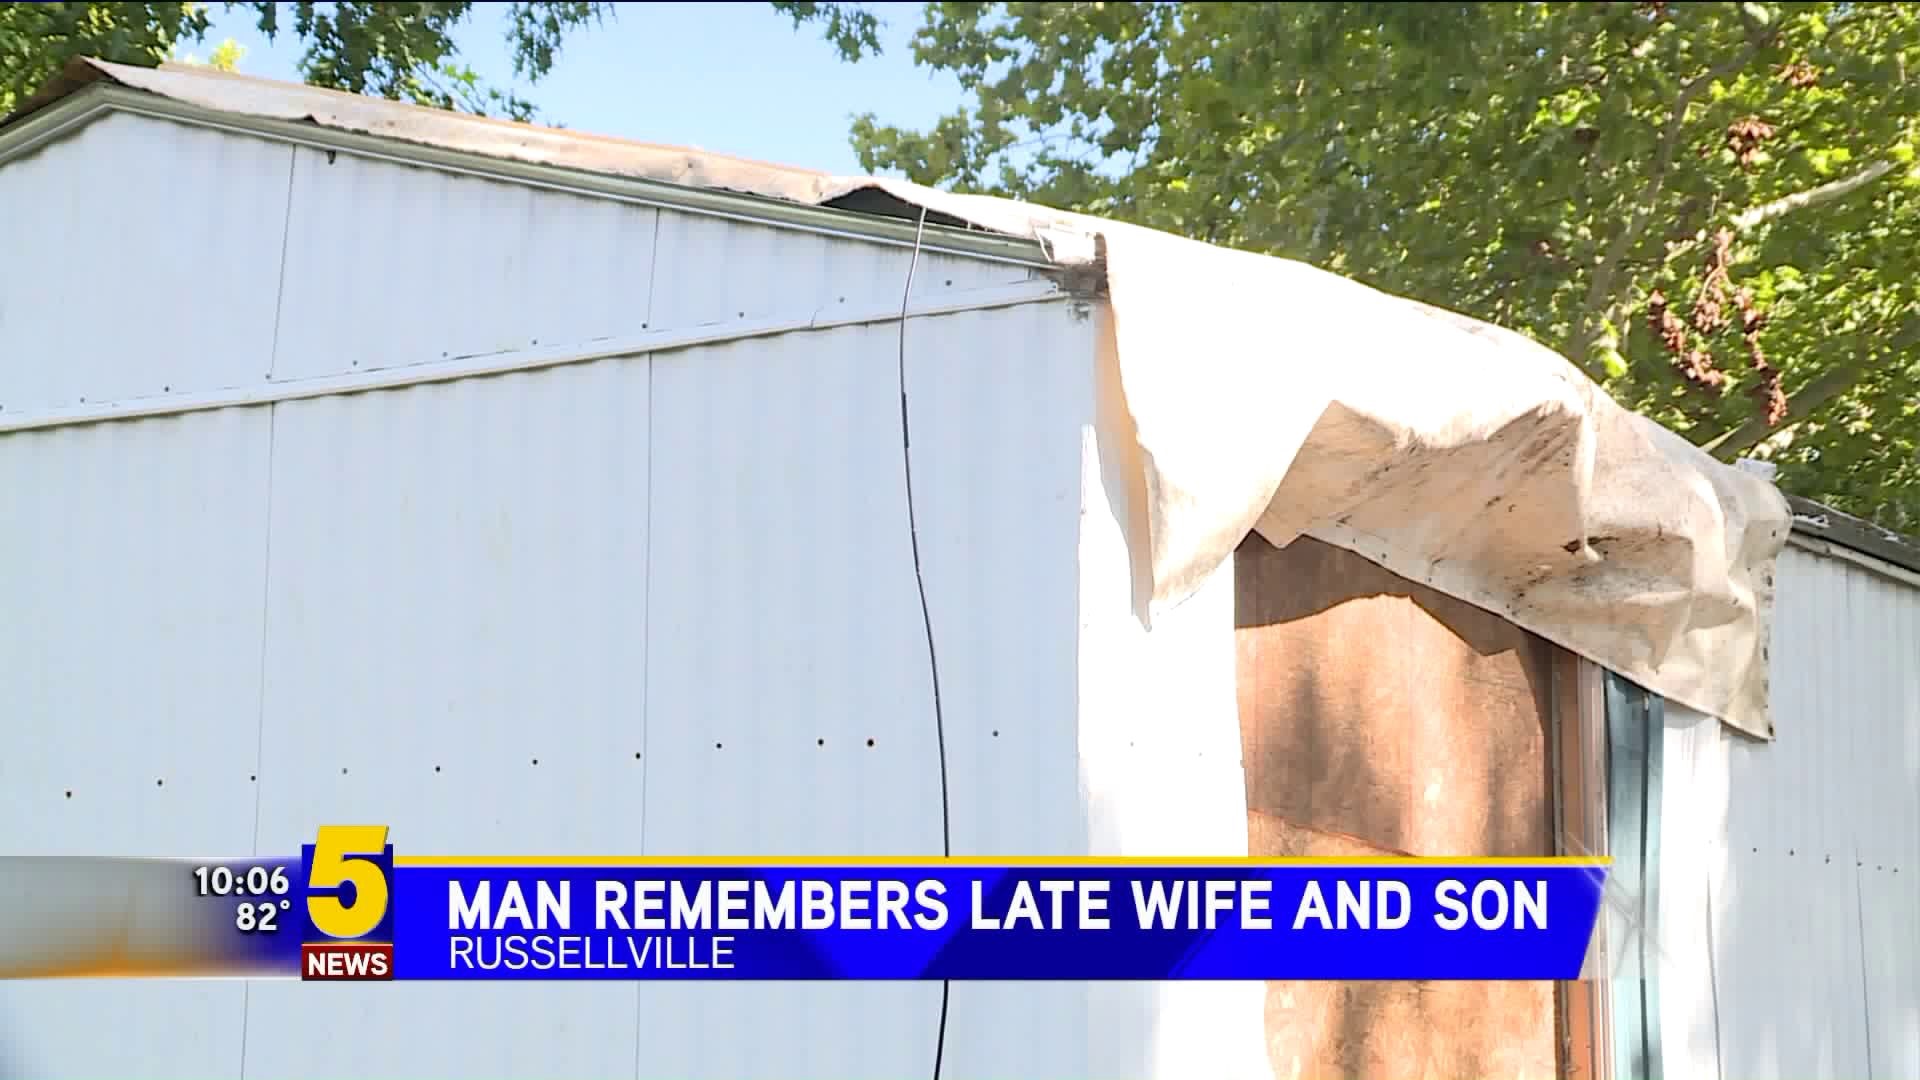 Man Remembers Late Wife And Son After Tree Falls On Home